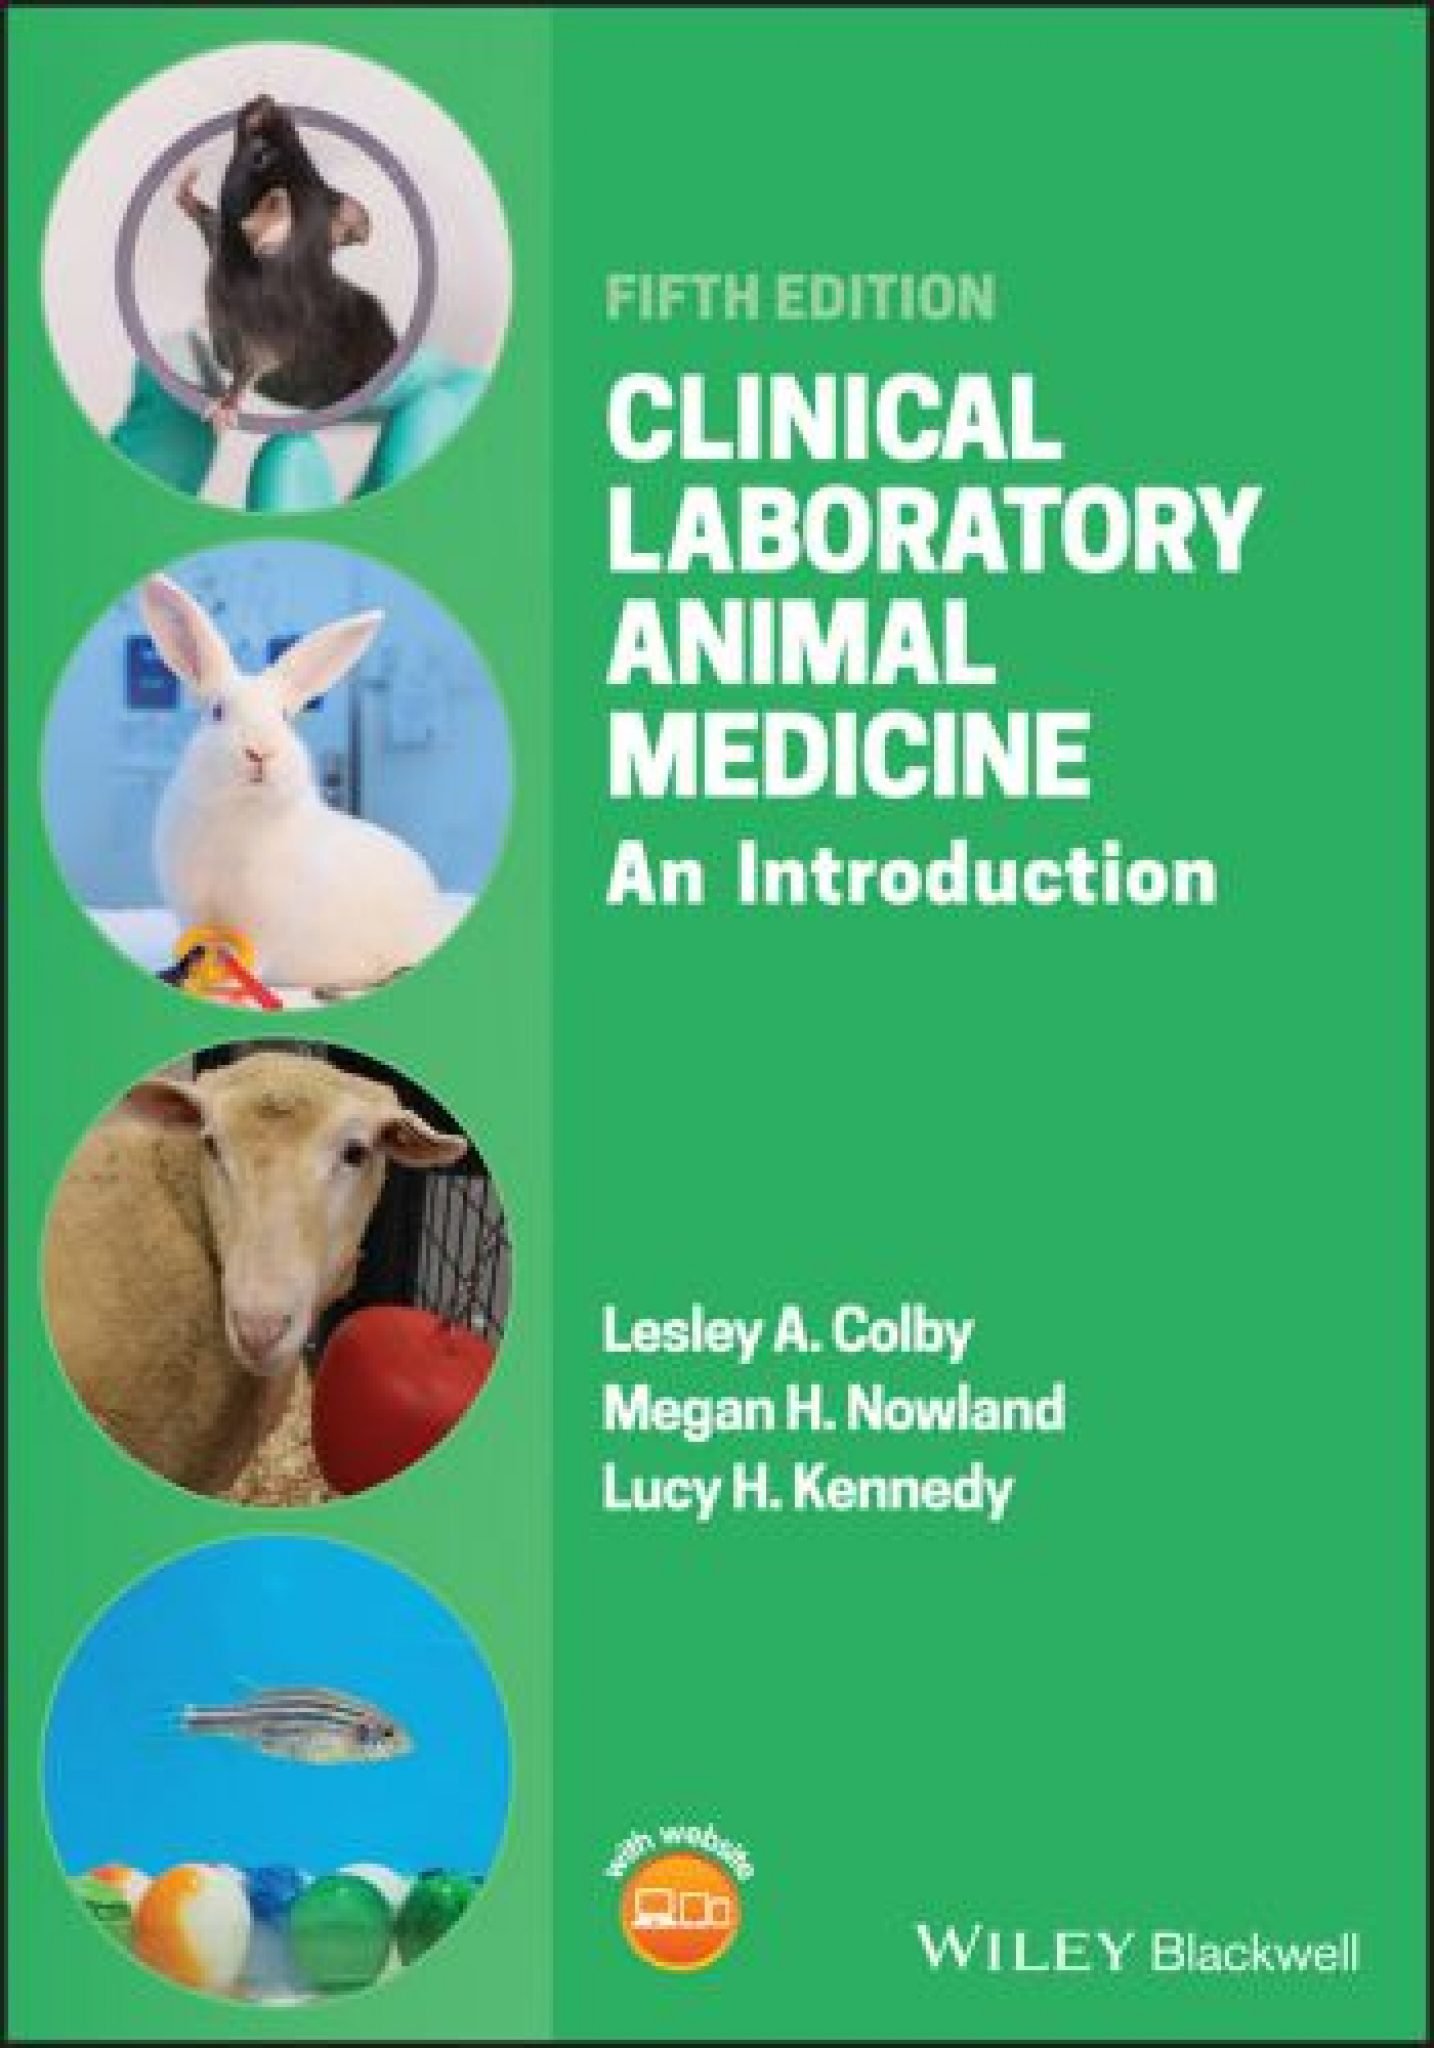 clinical research in animal science